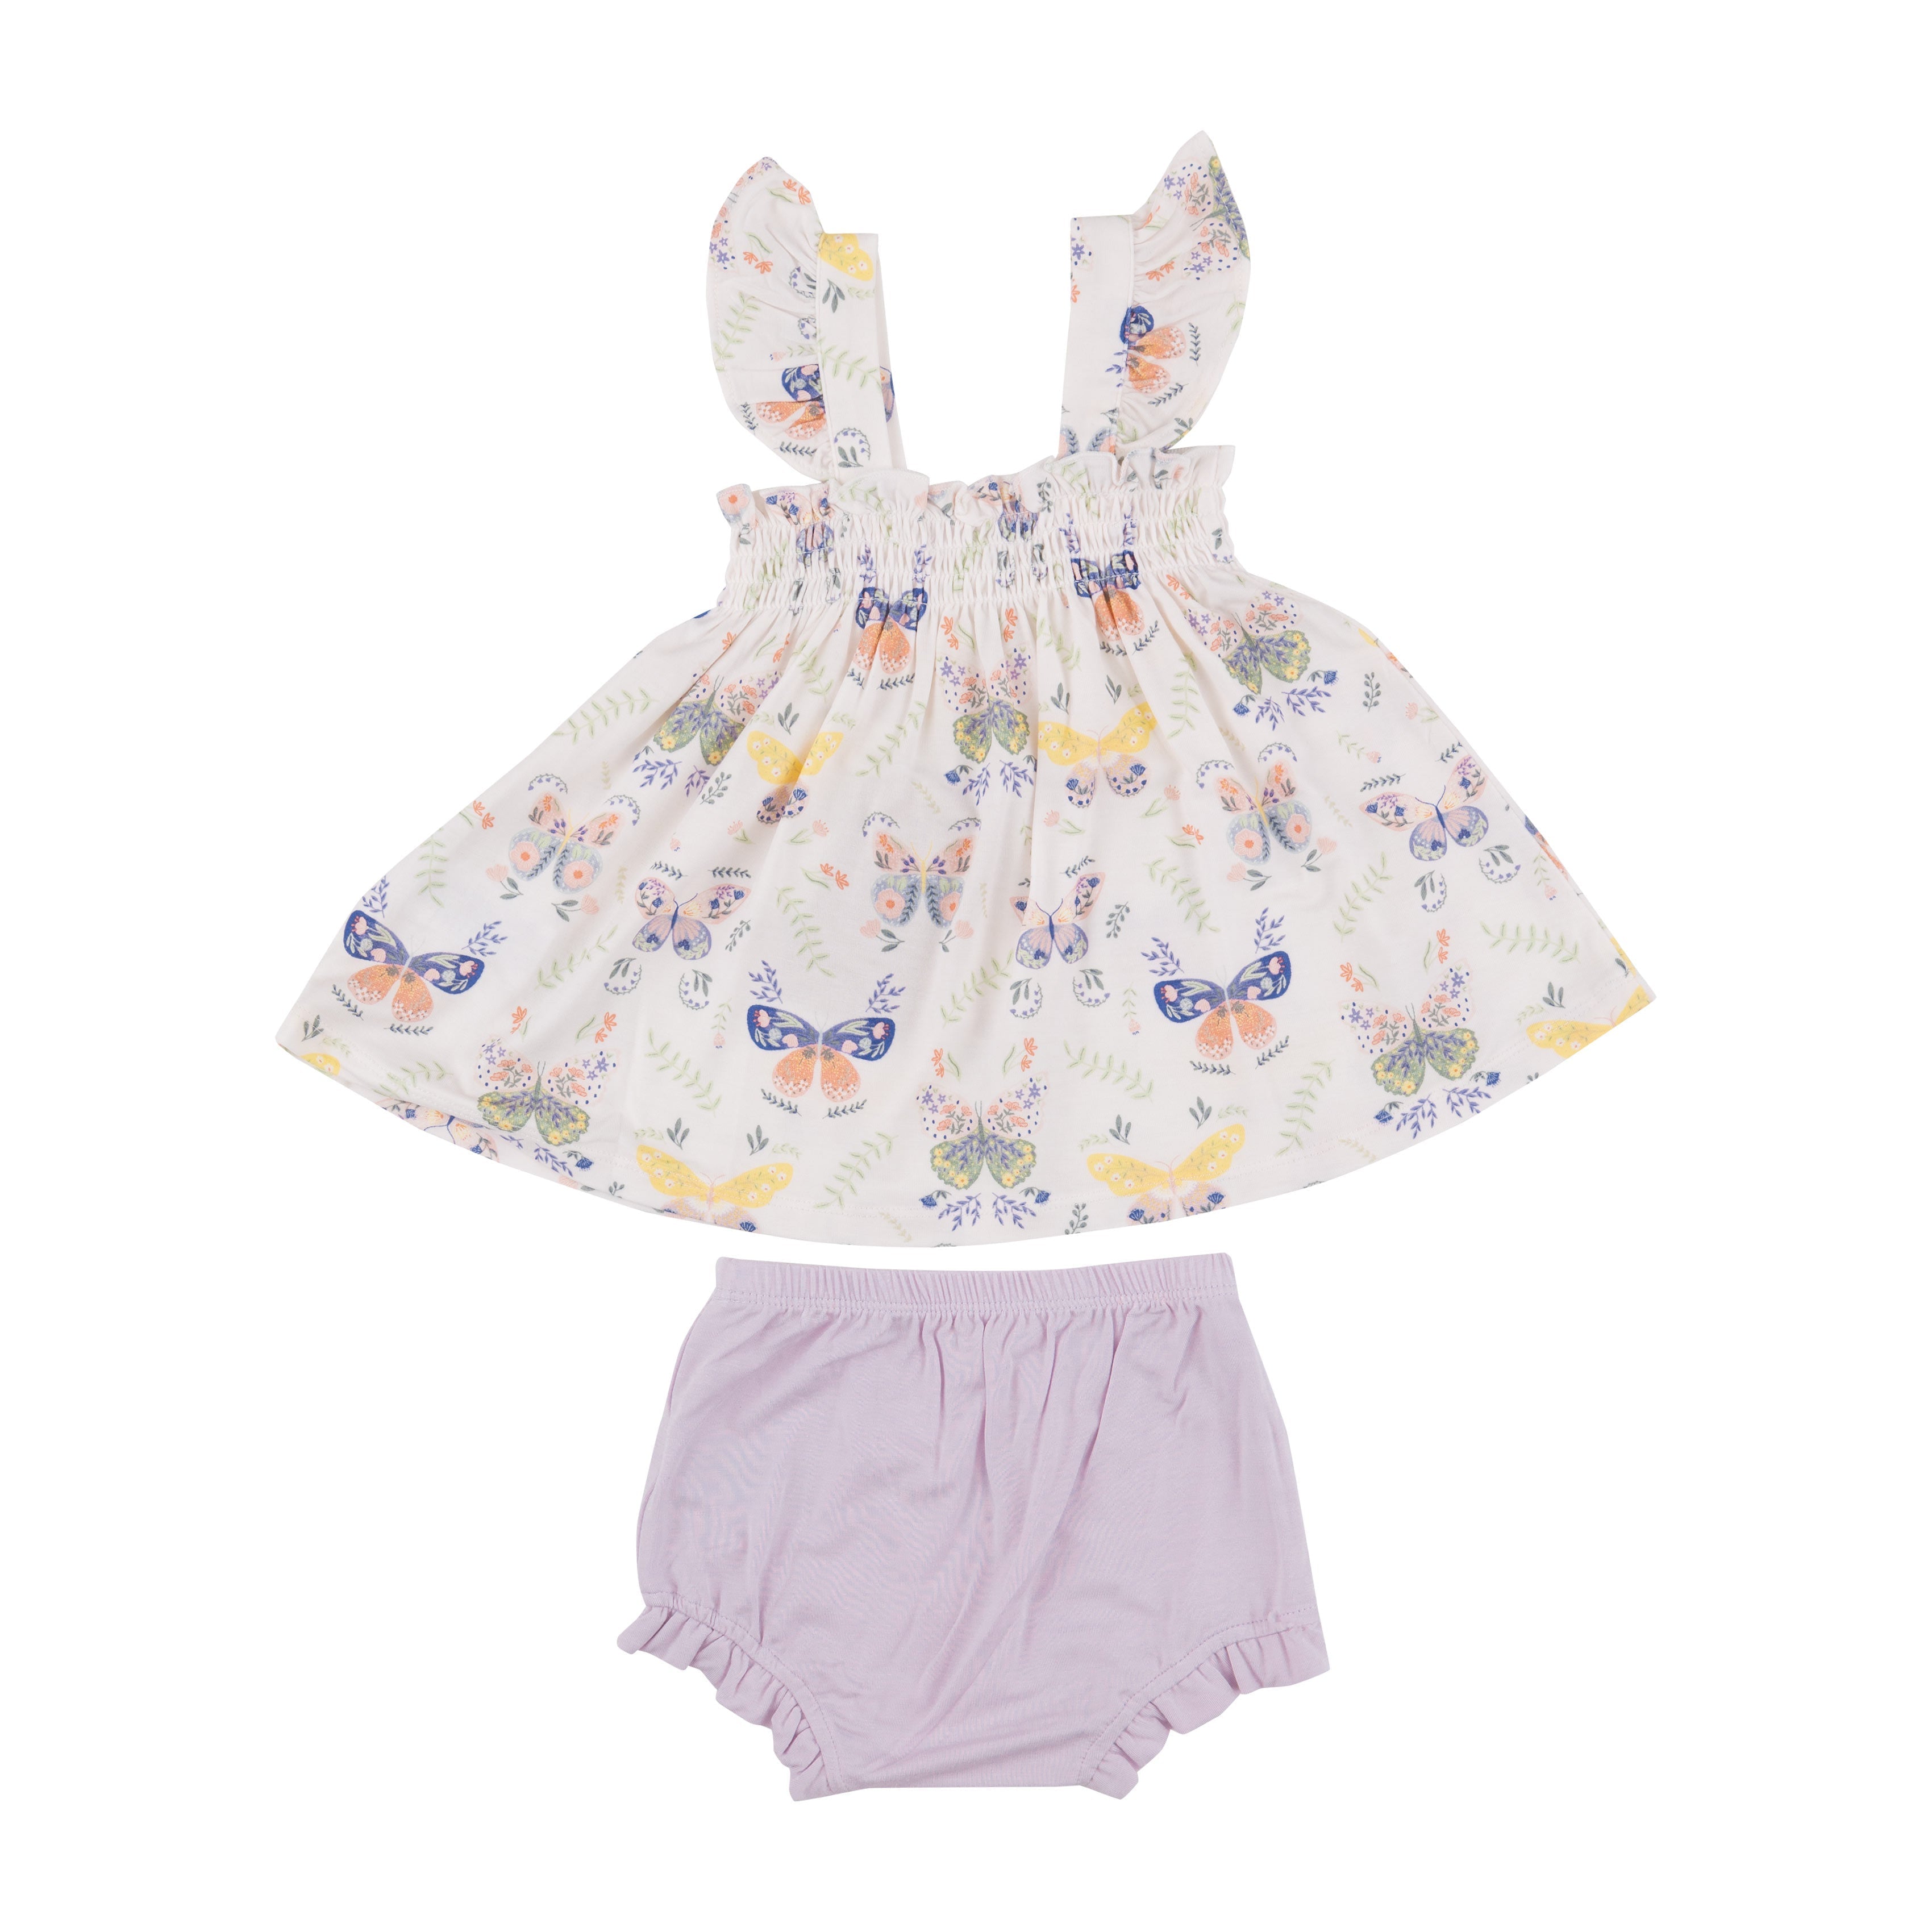 Ruffle Strap Smocked Top And Diaper Cover - Botany Butterflies